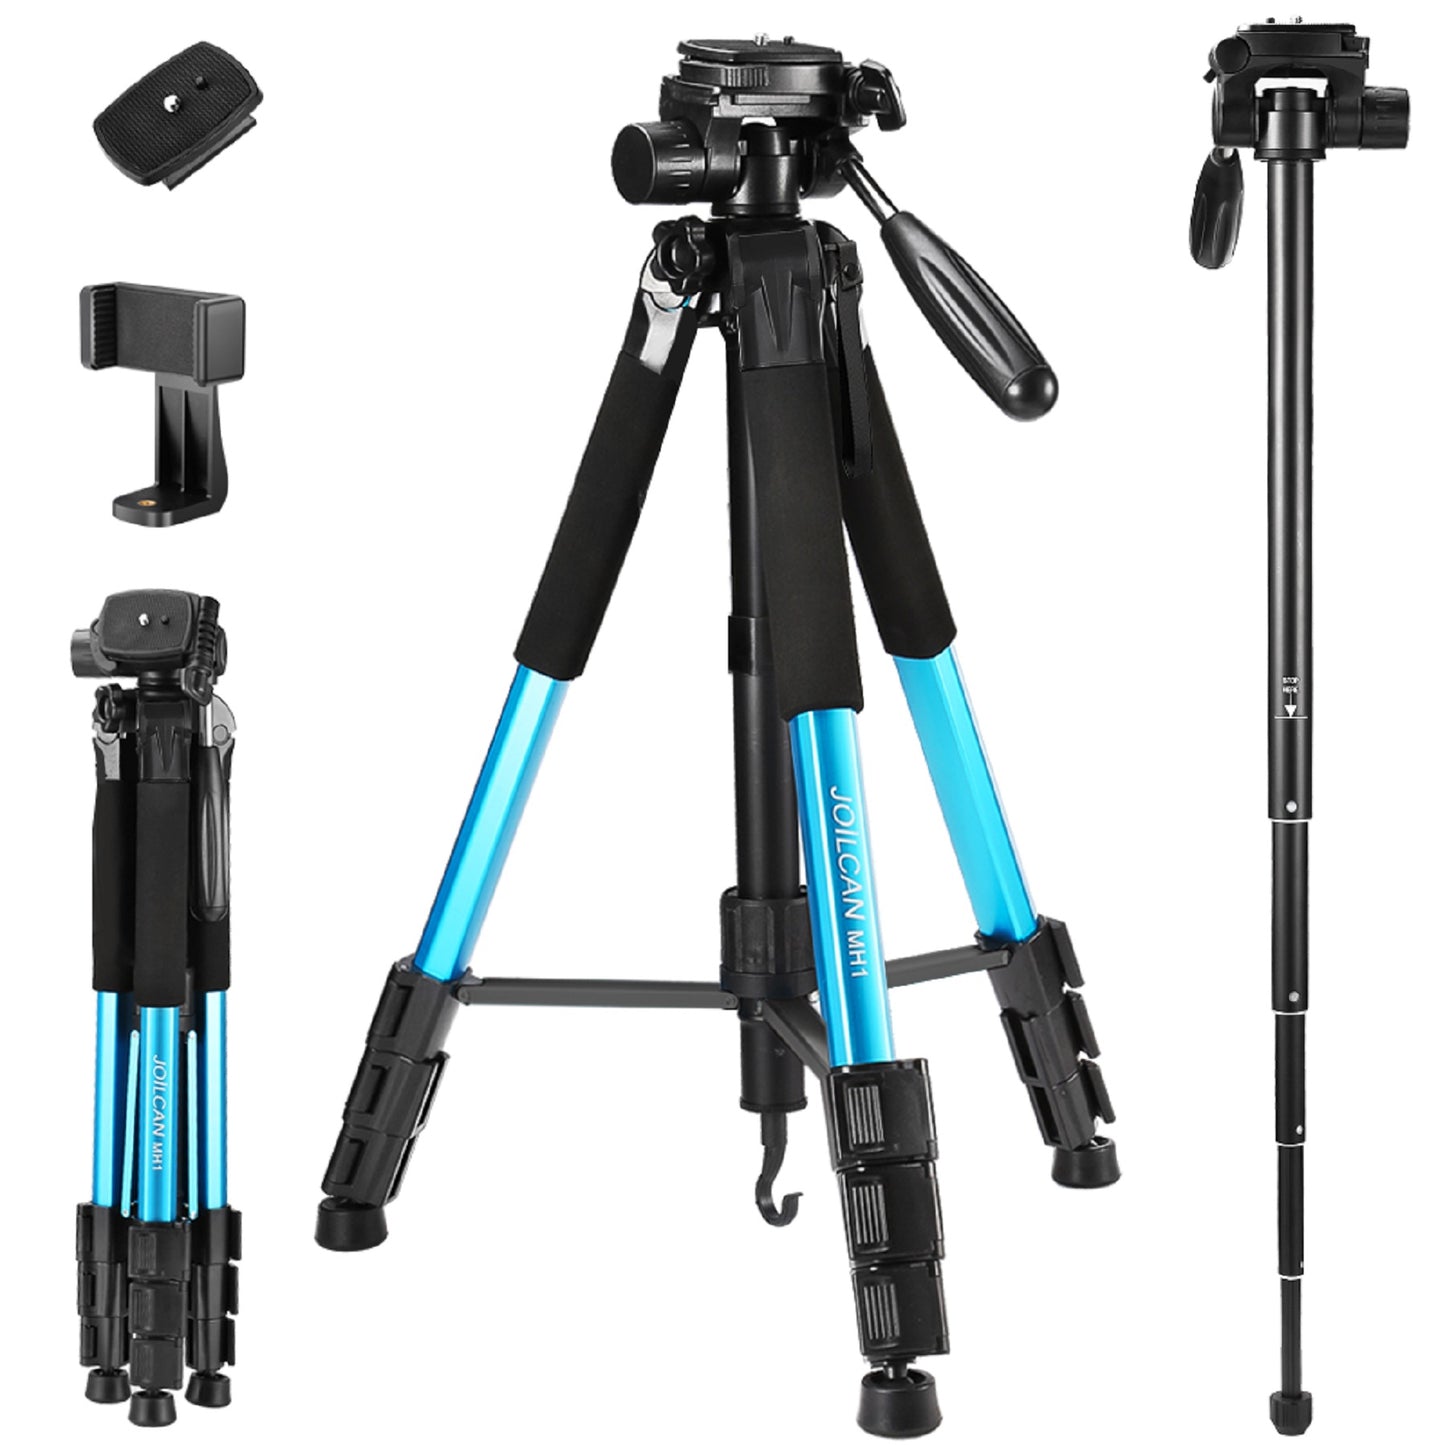 72-Inch Camera/Phone Tripod, Aluminum Tripod Travel Monopod Full Size for DSLR with 2 Quick Release Plates,Universal Phone Mount and Convenient Carrying Case Ideal for Travel and Work - MH1 Blue